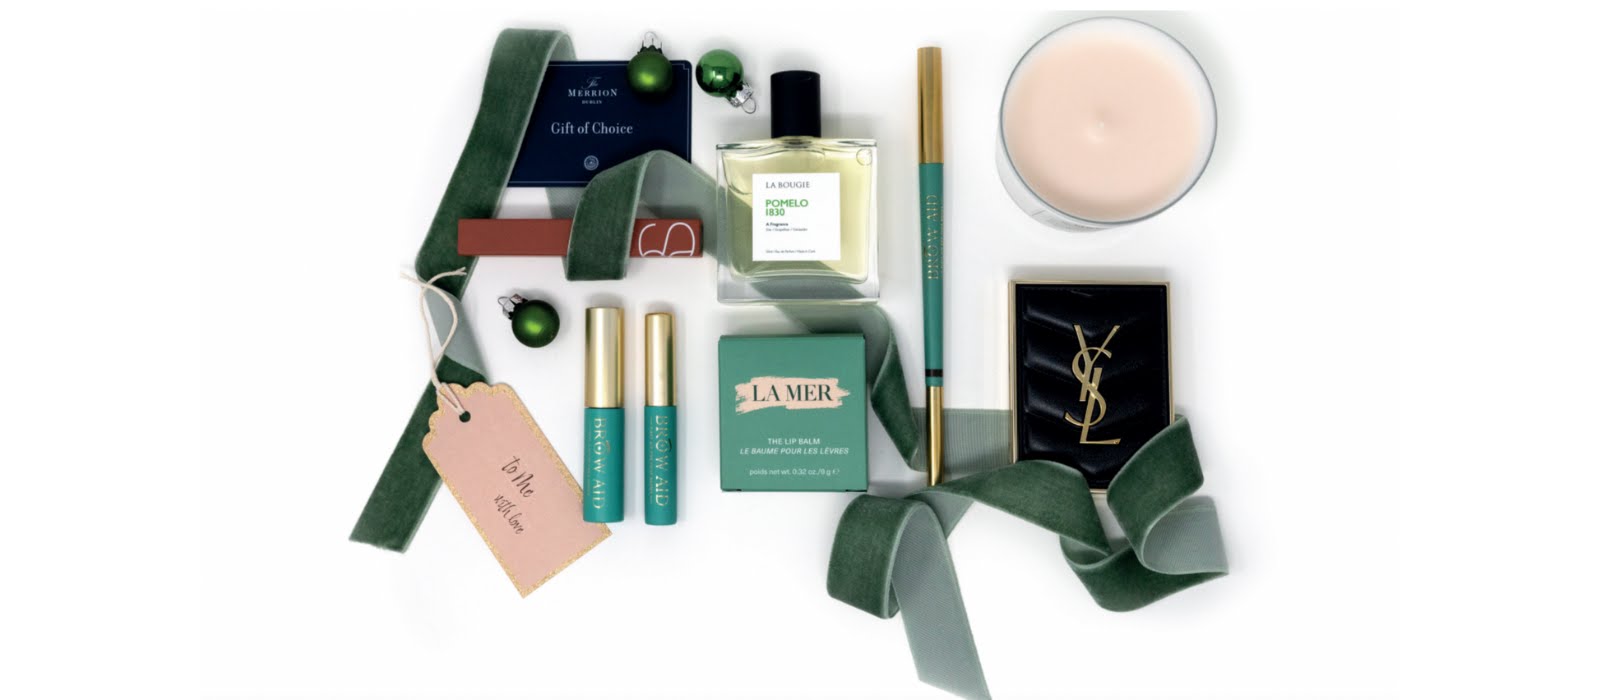 All About Me: The best beauty bits to treat yourself to this Christmas